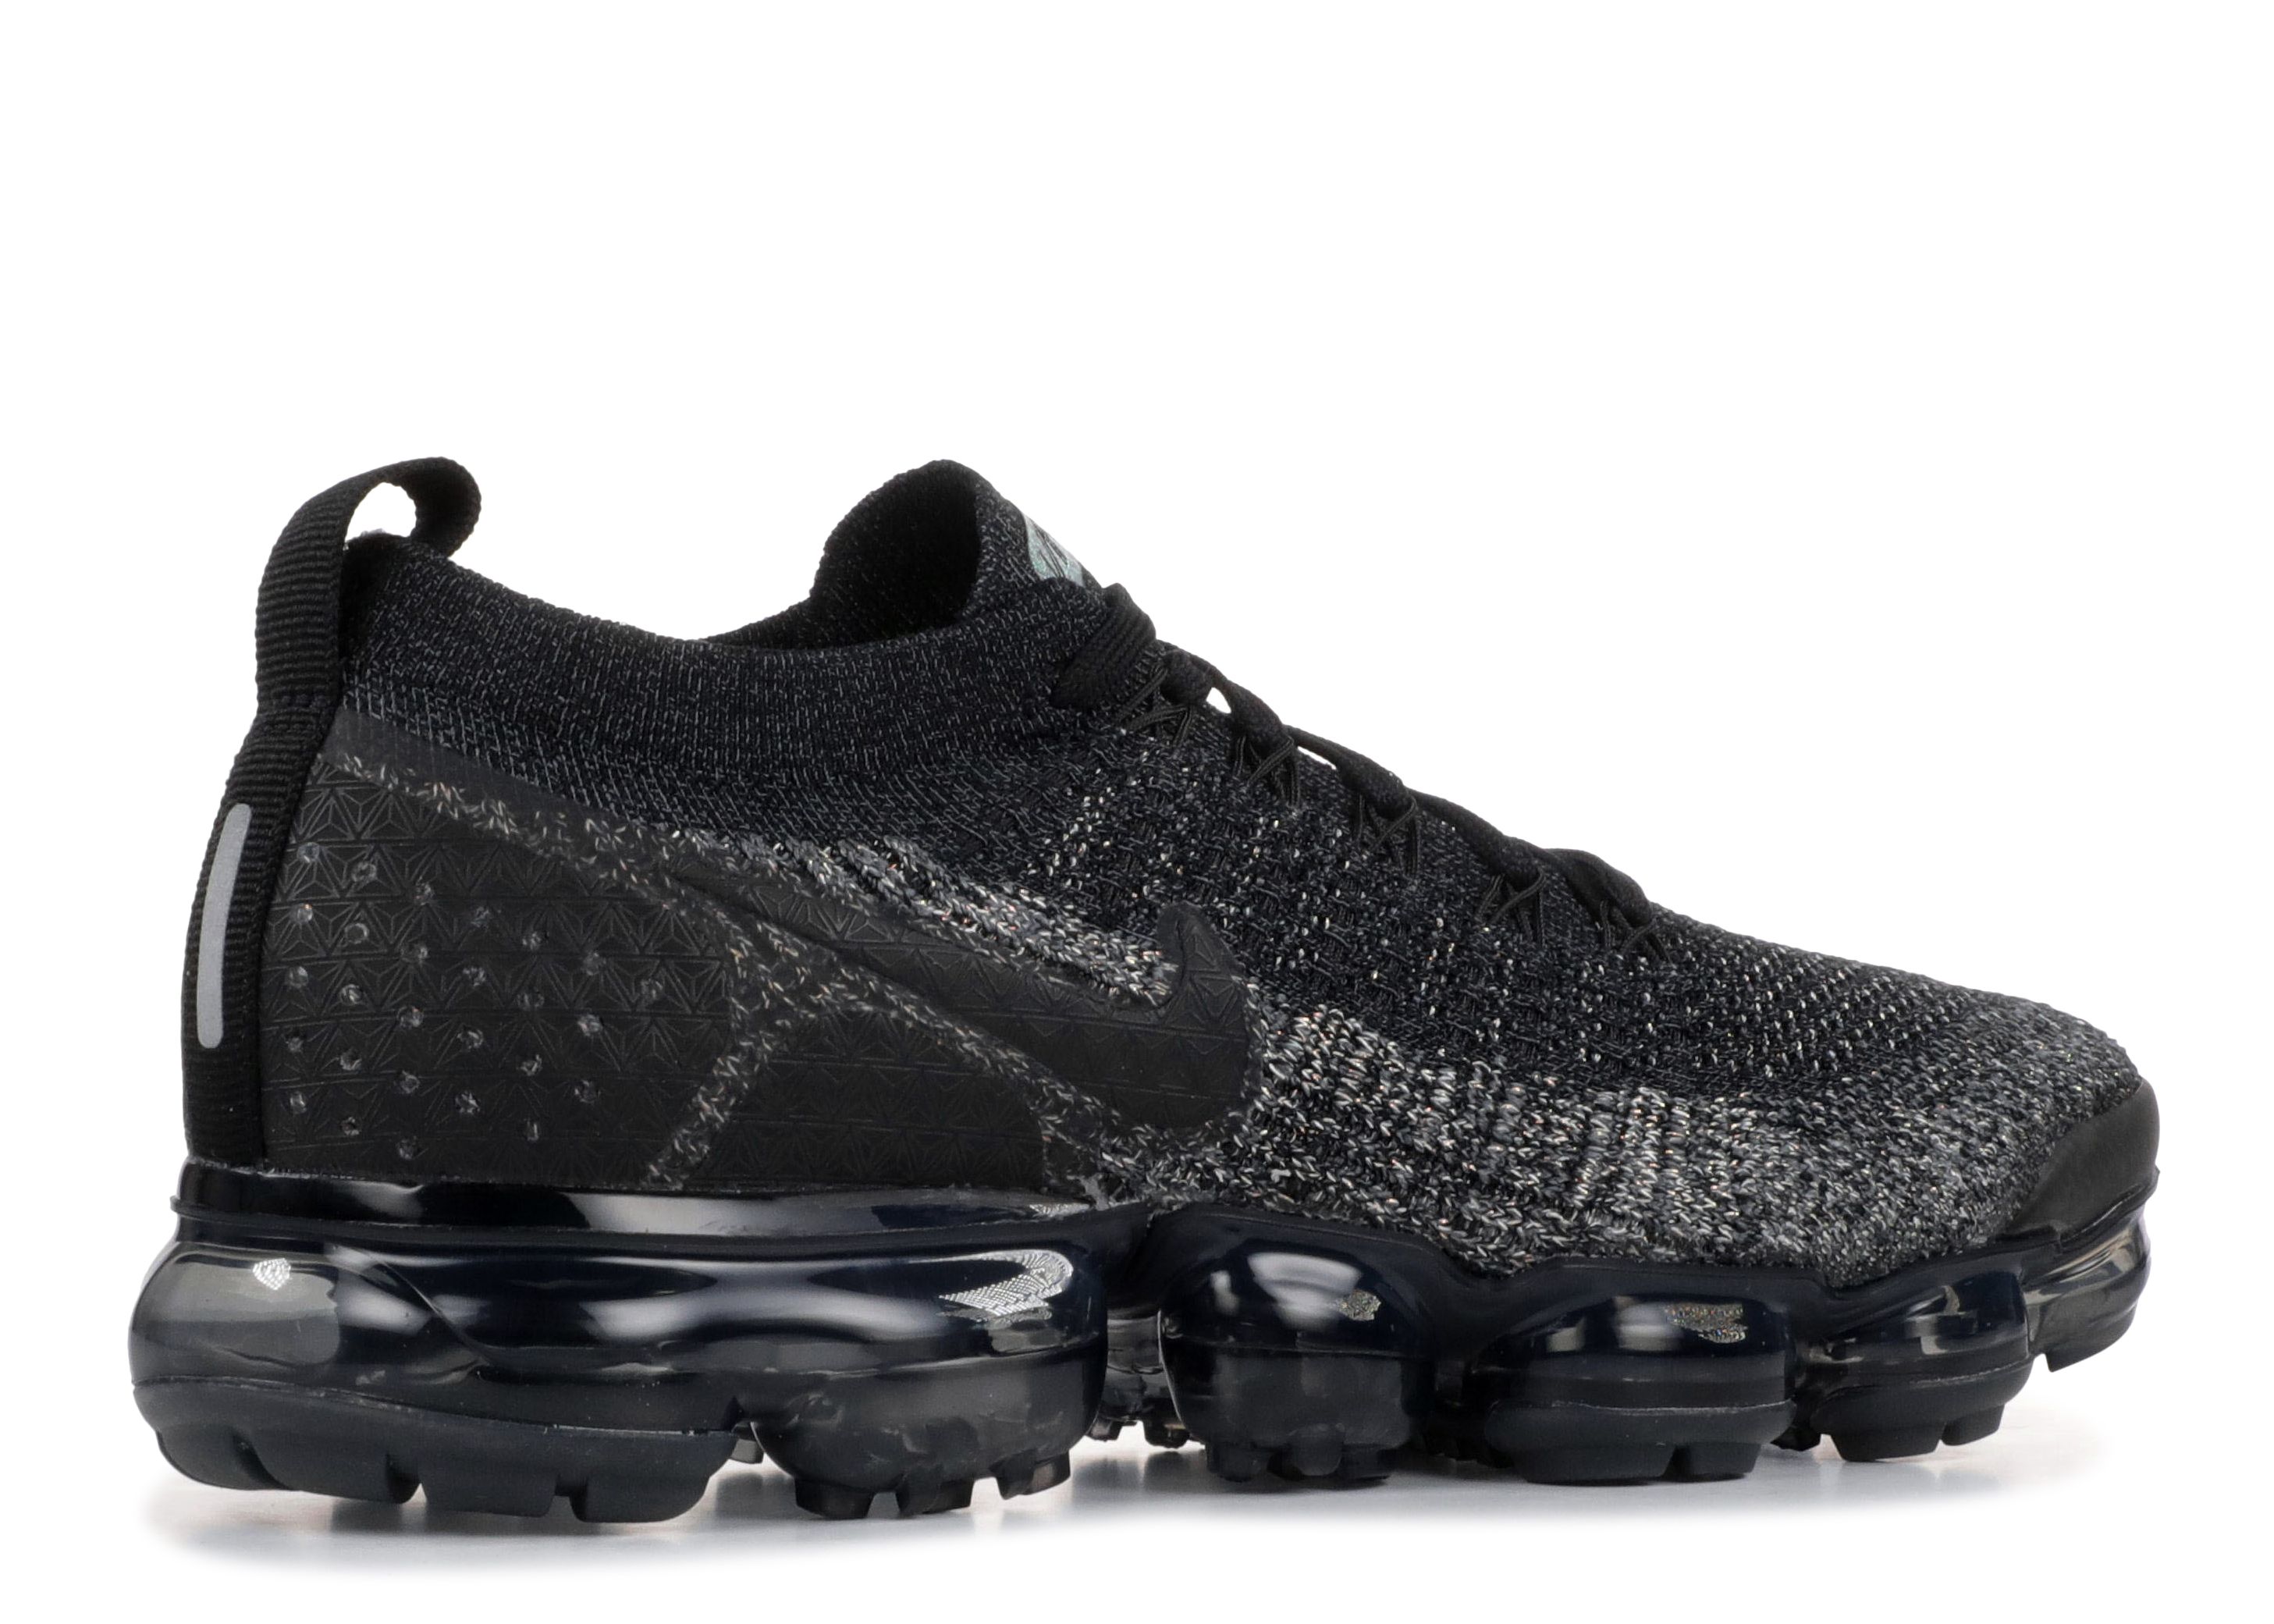 black and grey flyknit vapormax